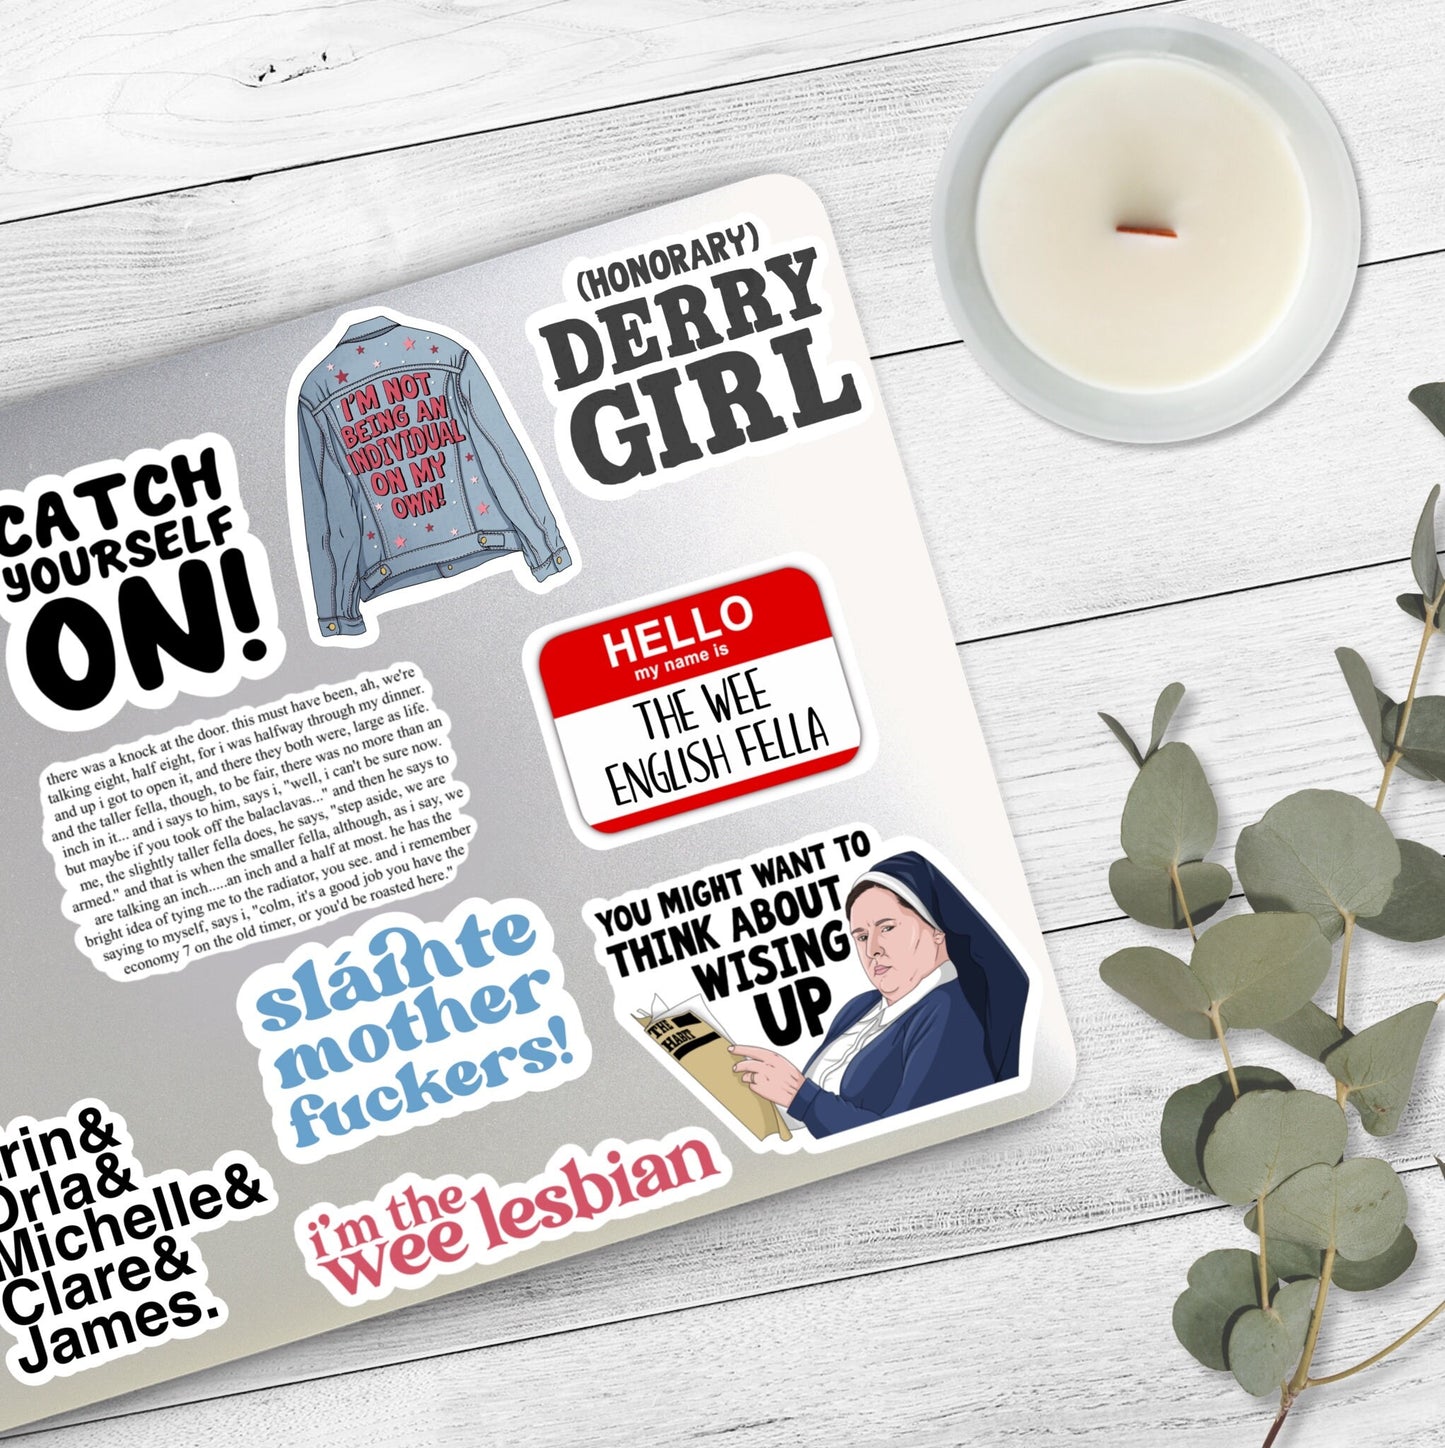 You Might Want to Think About Wising Up | Sister Michael | Derry Girls Stickers